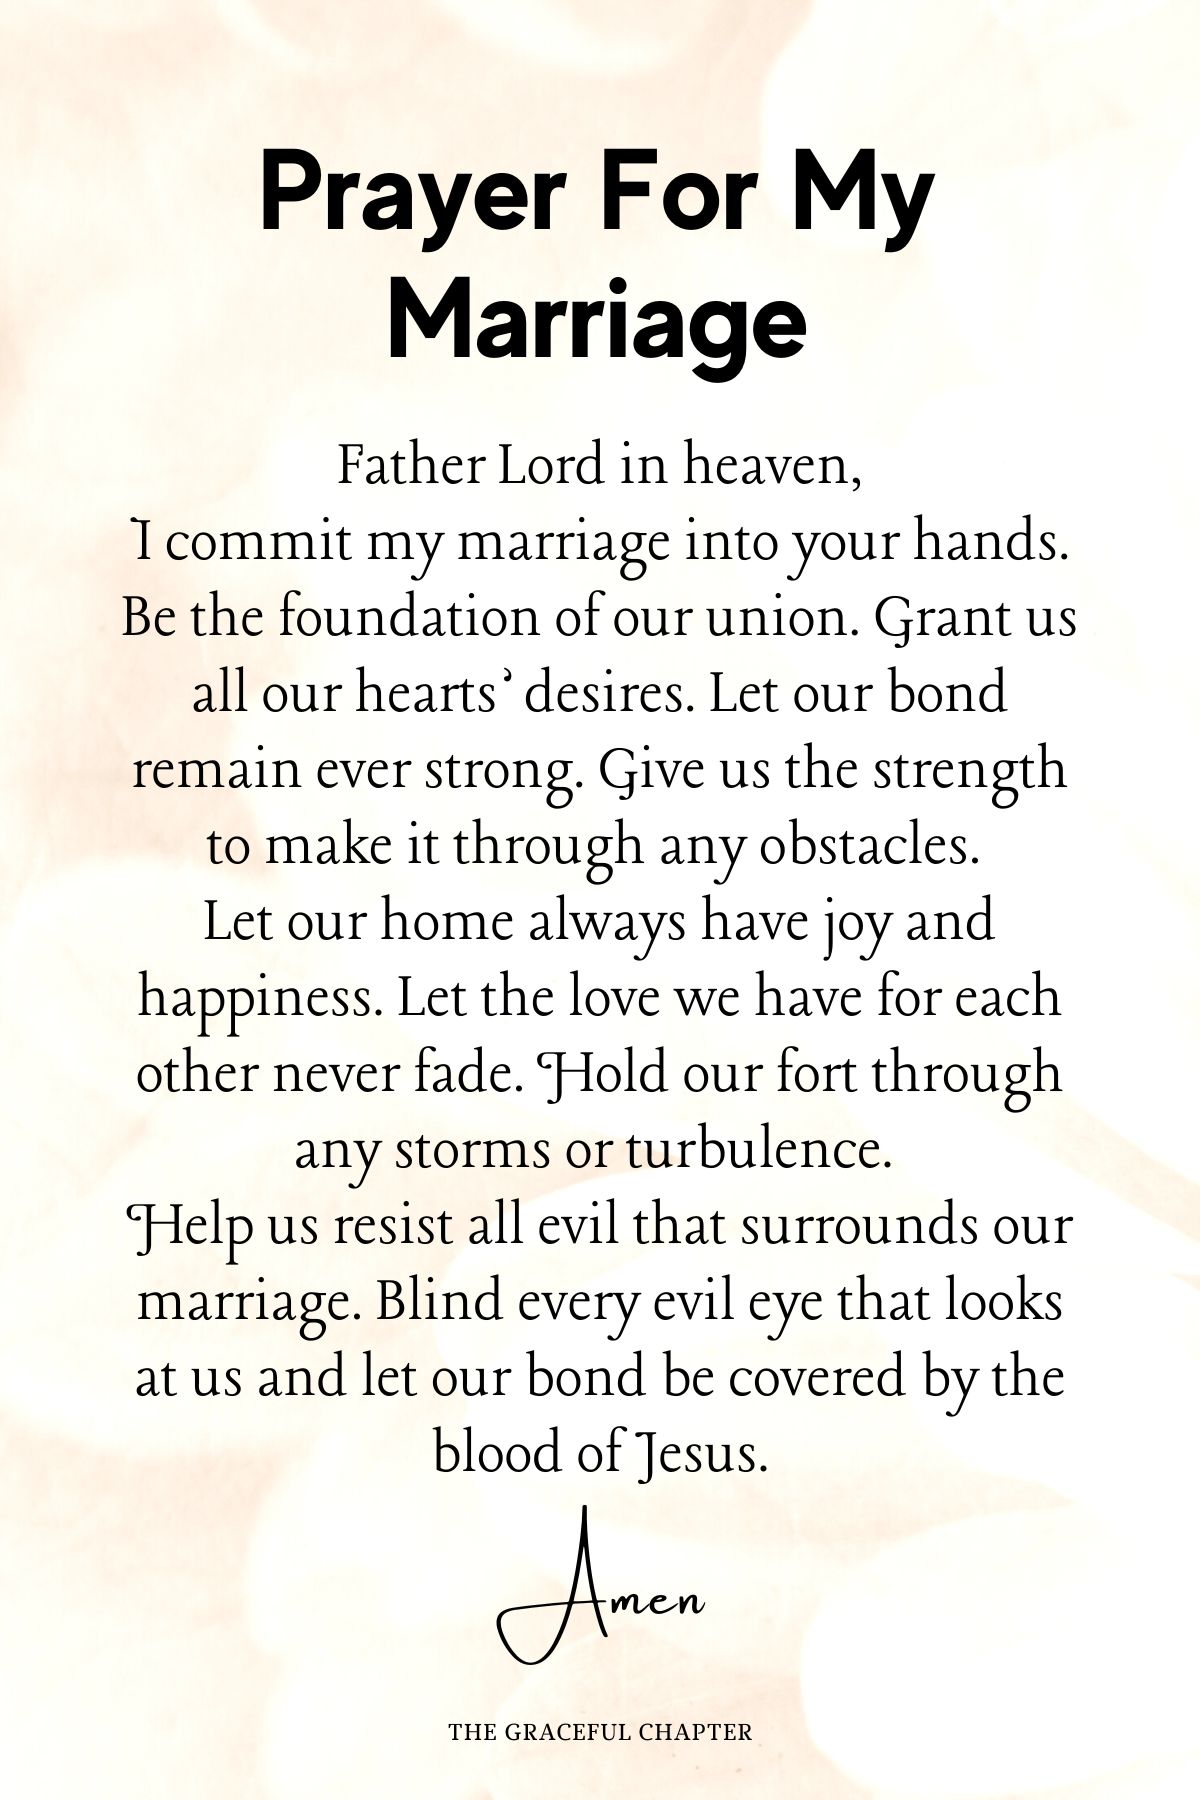 Prayer for my marriage